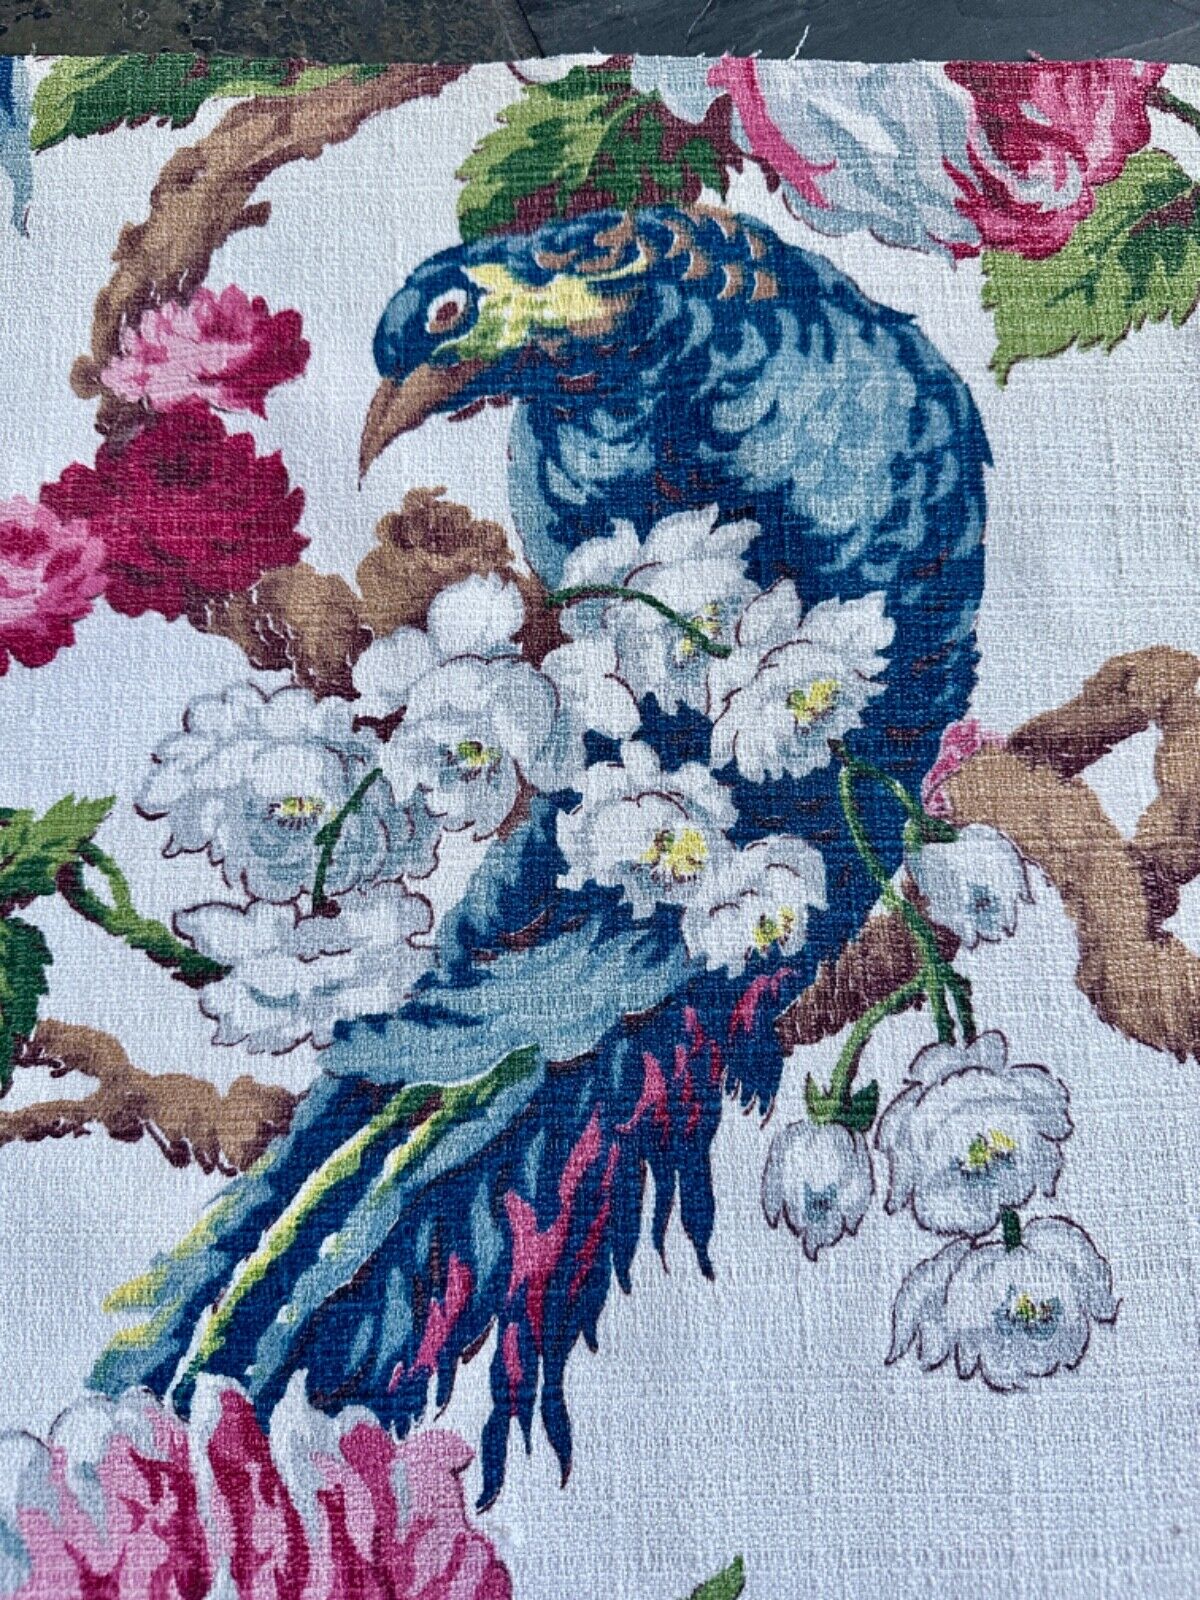 Celestial Midnight Blue RAVEN & Cluster Roses Barkcloth Vintage Fabric PILLOWS